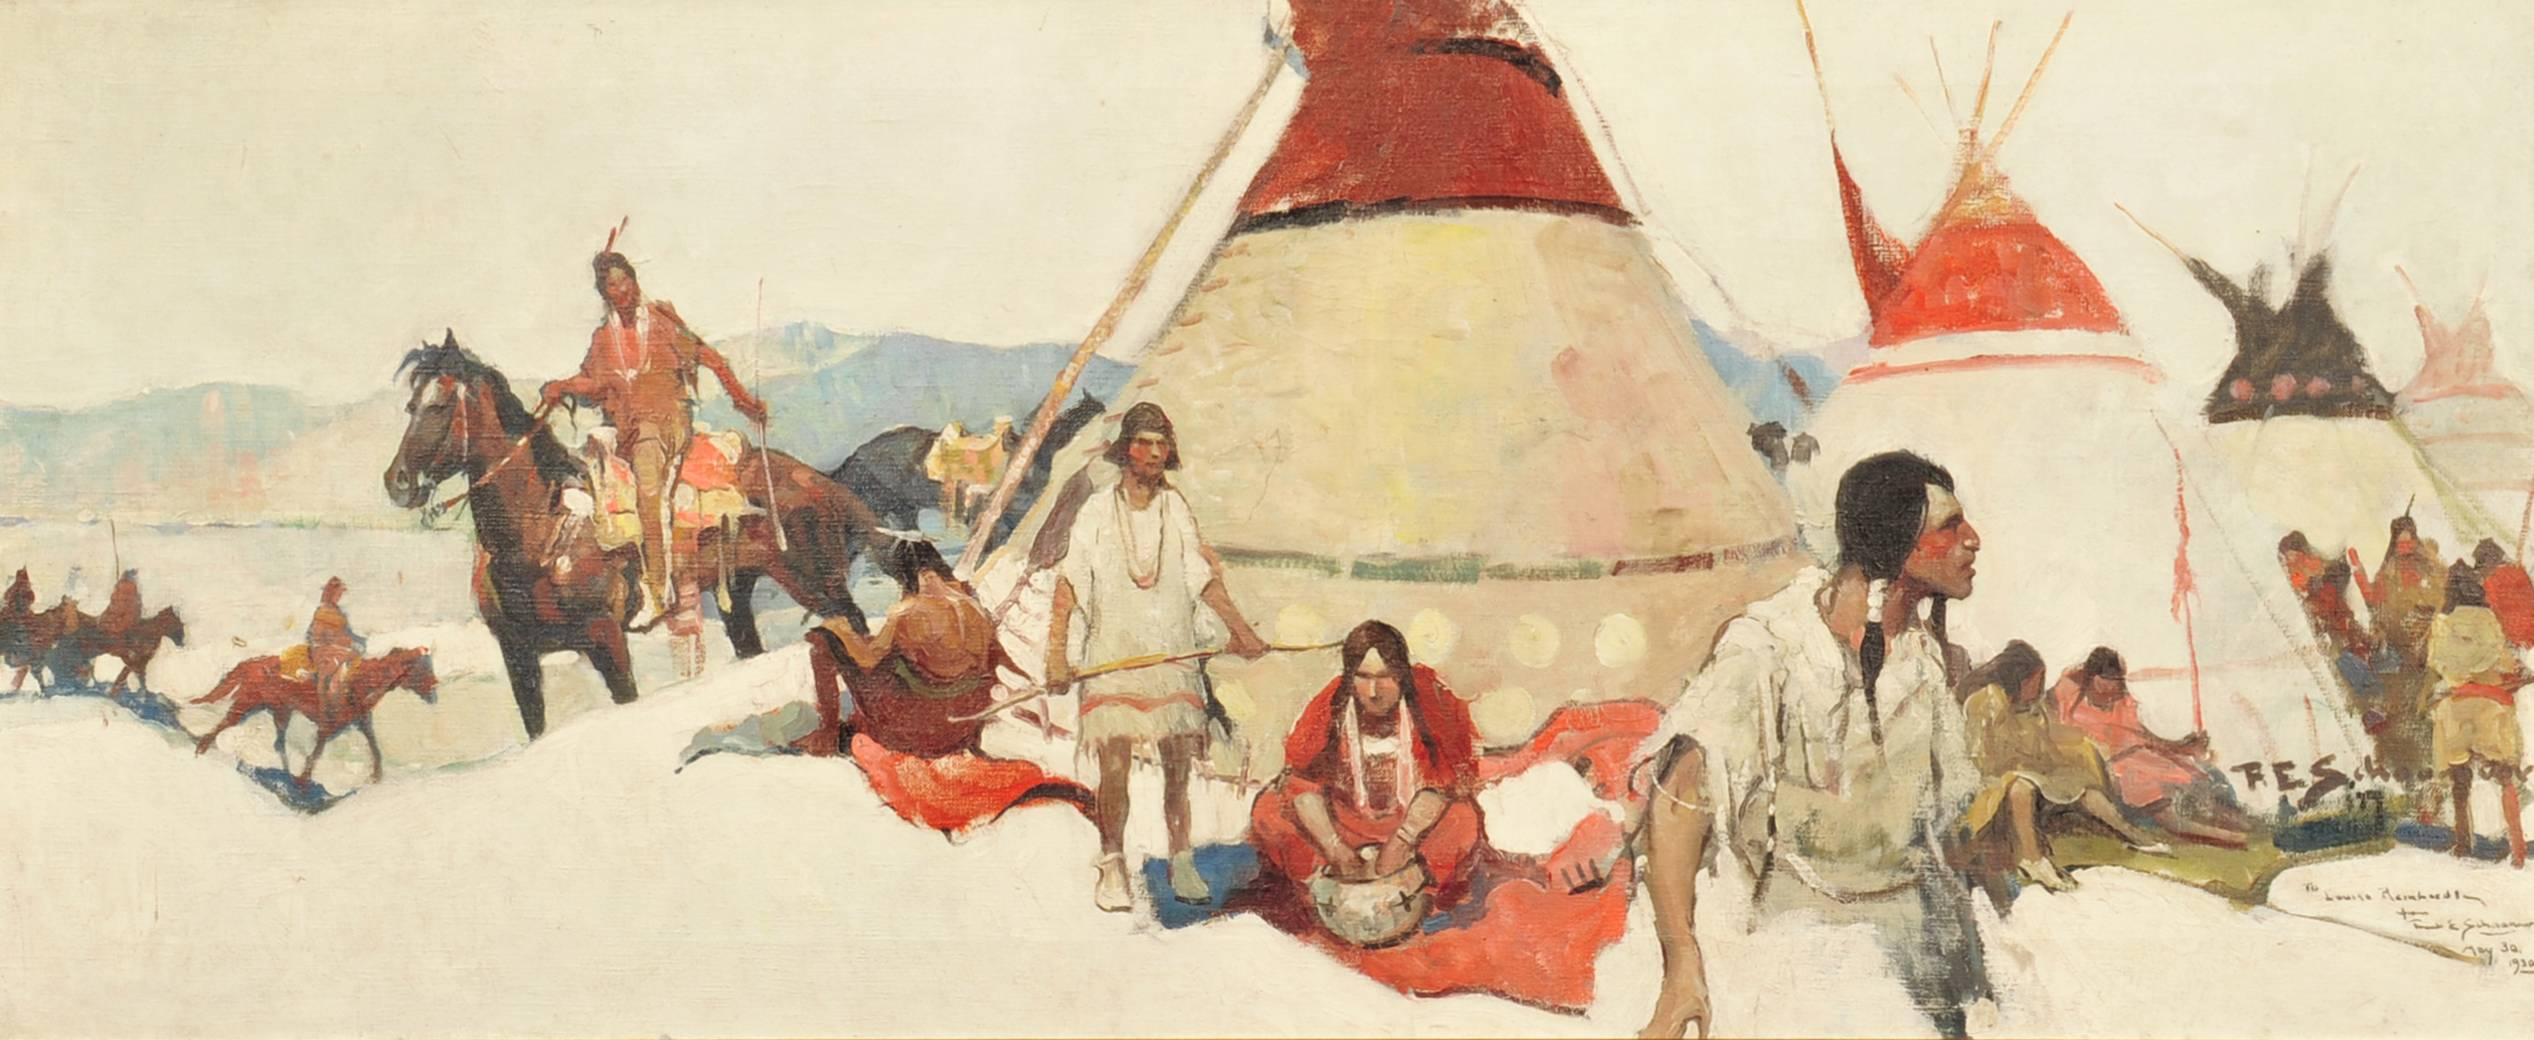 Frank Schoonover Figurative Painting - "We Went Into Camp"